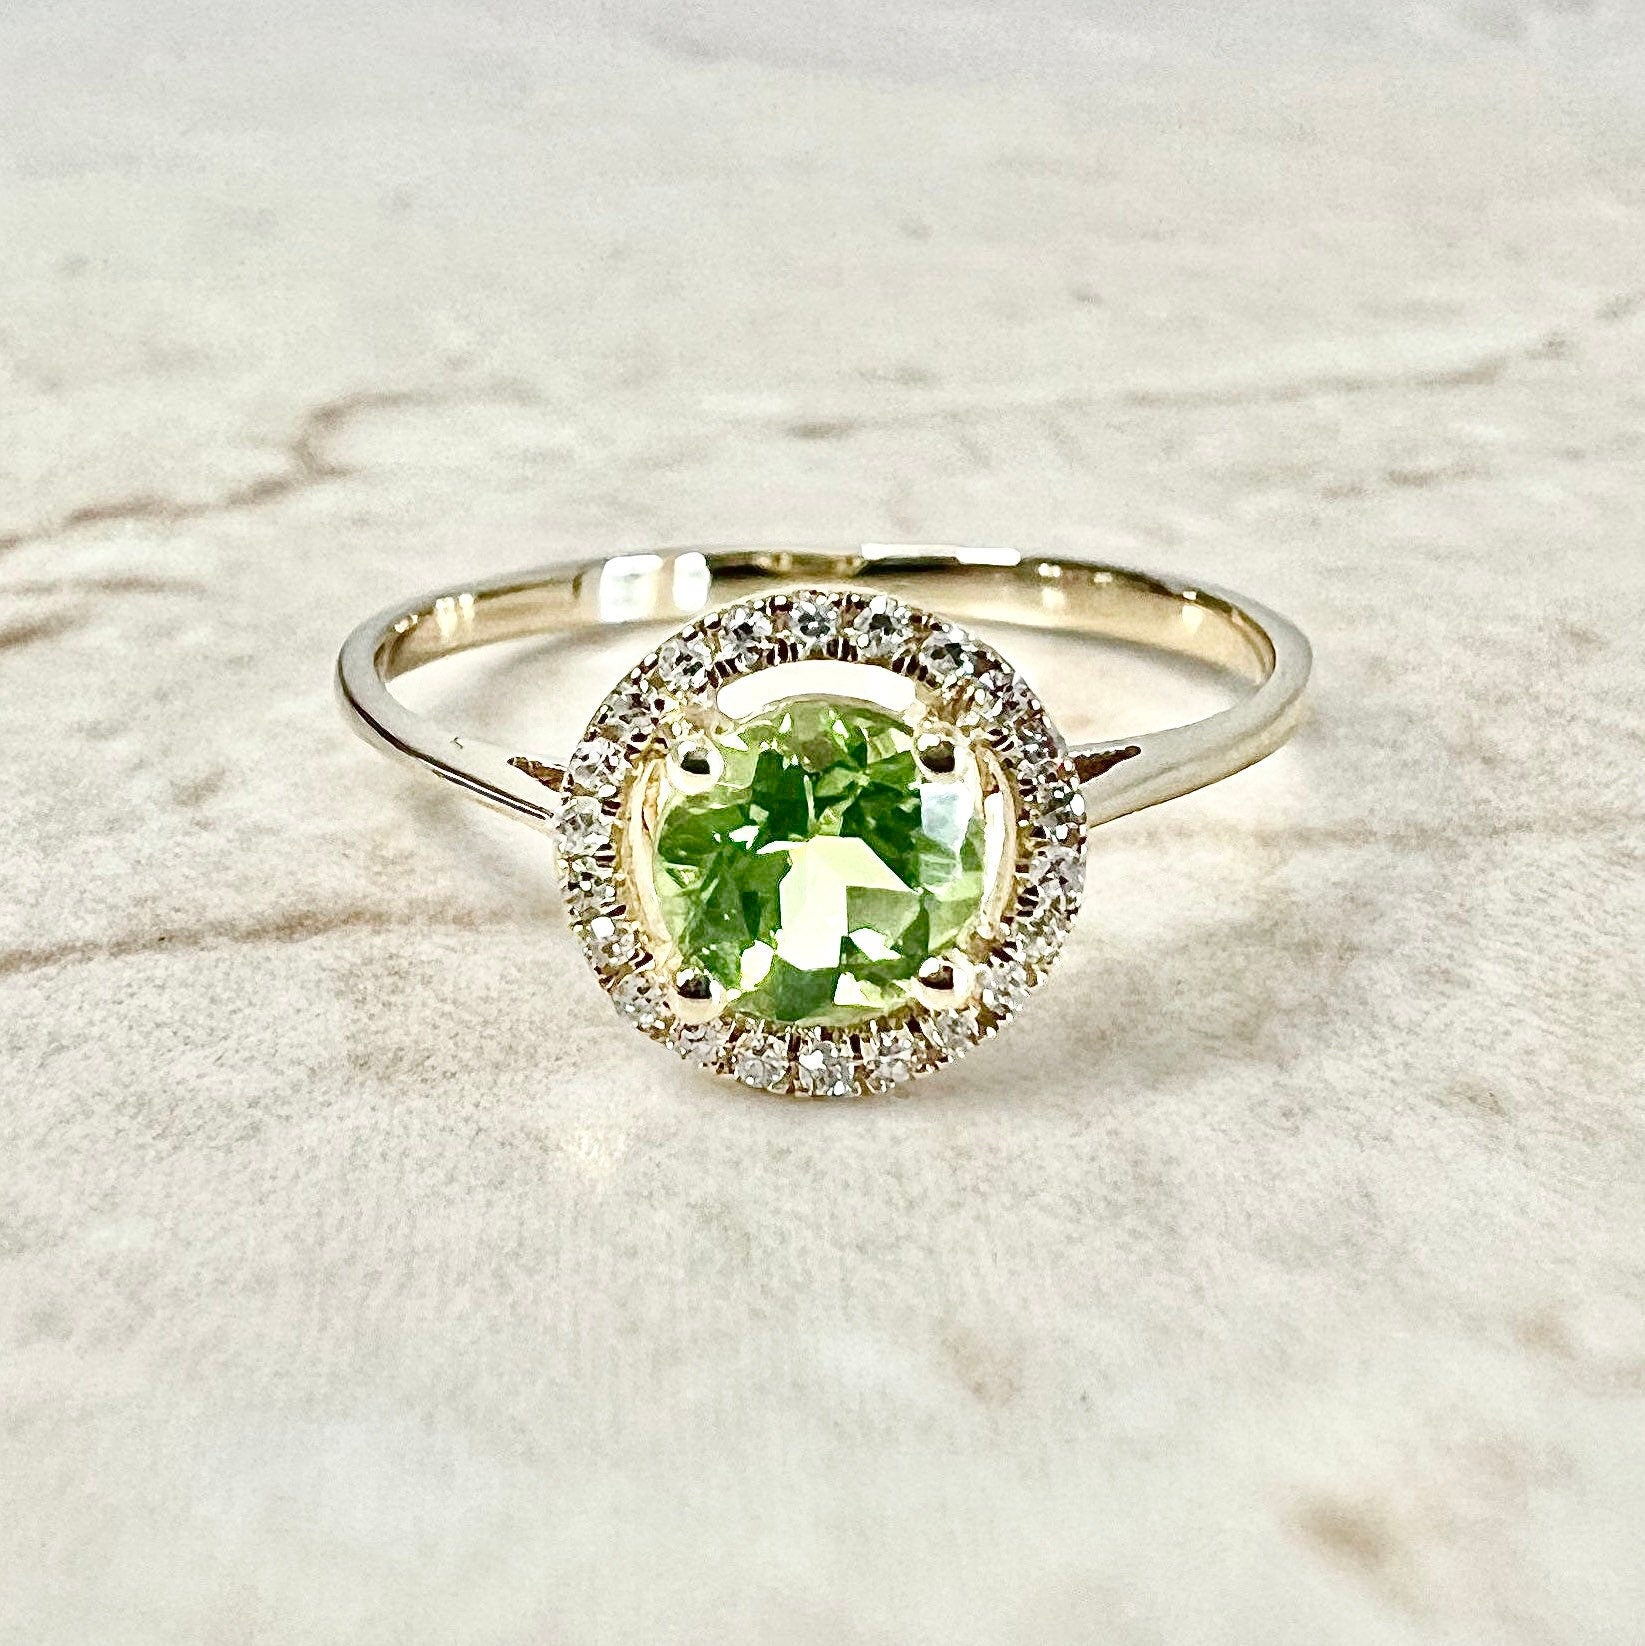 August Birthstone Ring – The Silver Unicorn